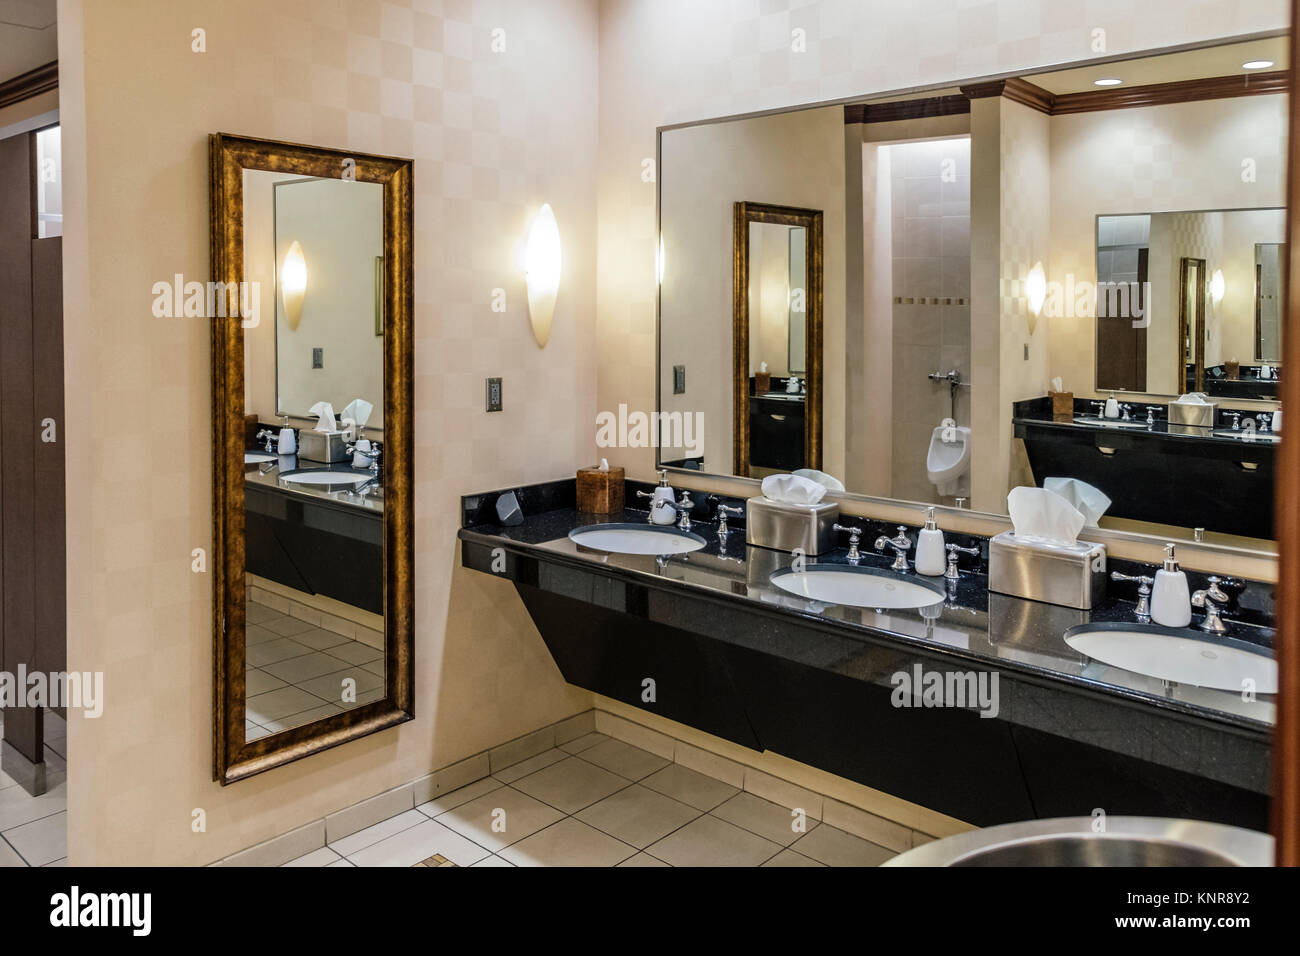 Interior of public men's bathroom or toilet in a luxury hotel, the Renaissance Hotel and Spa in Montgomery, Alabama, USA. Stock Photo